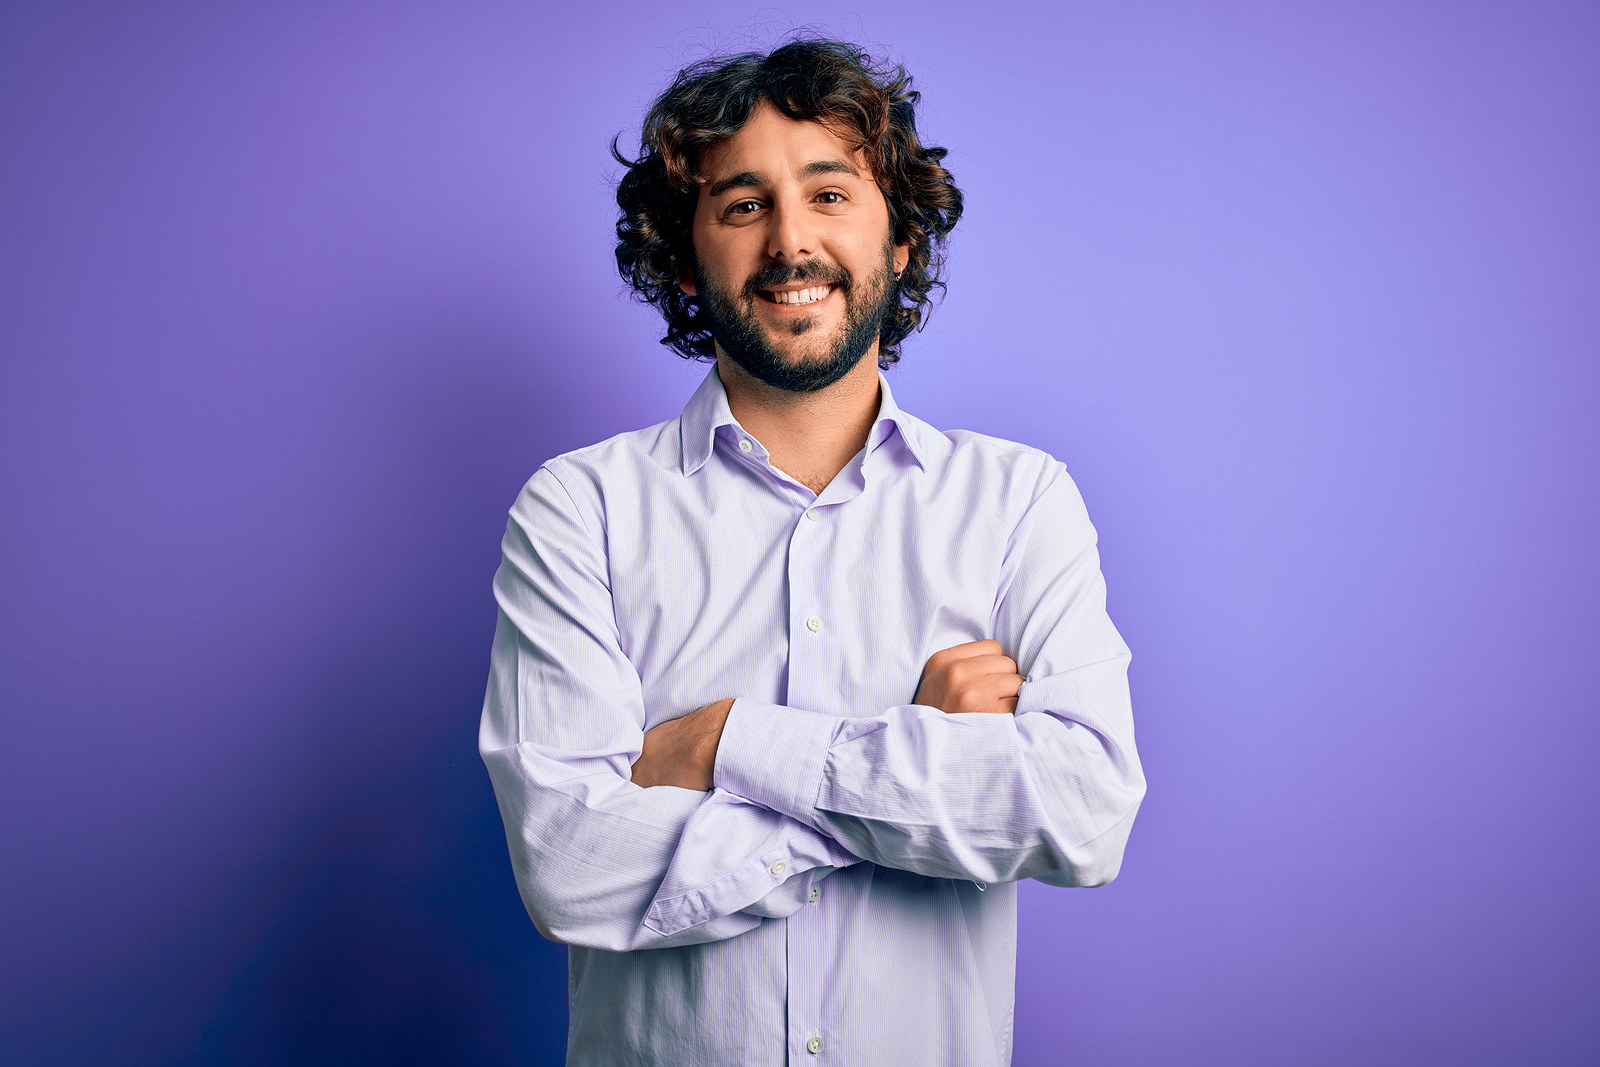 Young handsome business man with beard wearing shirt standing over purple background happy face smiling with crossed arms looking at the camera